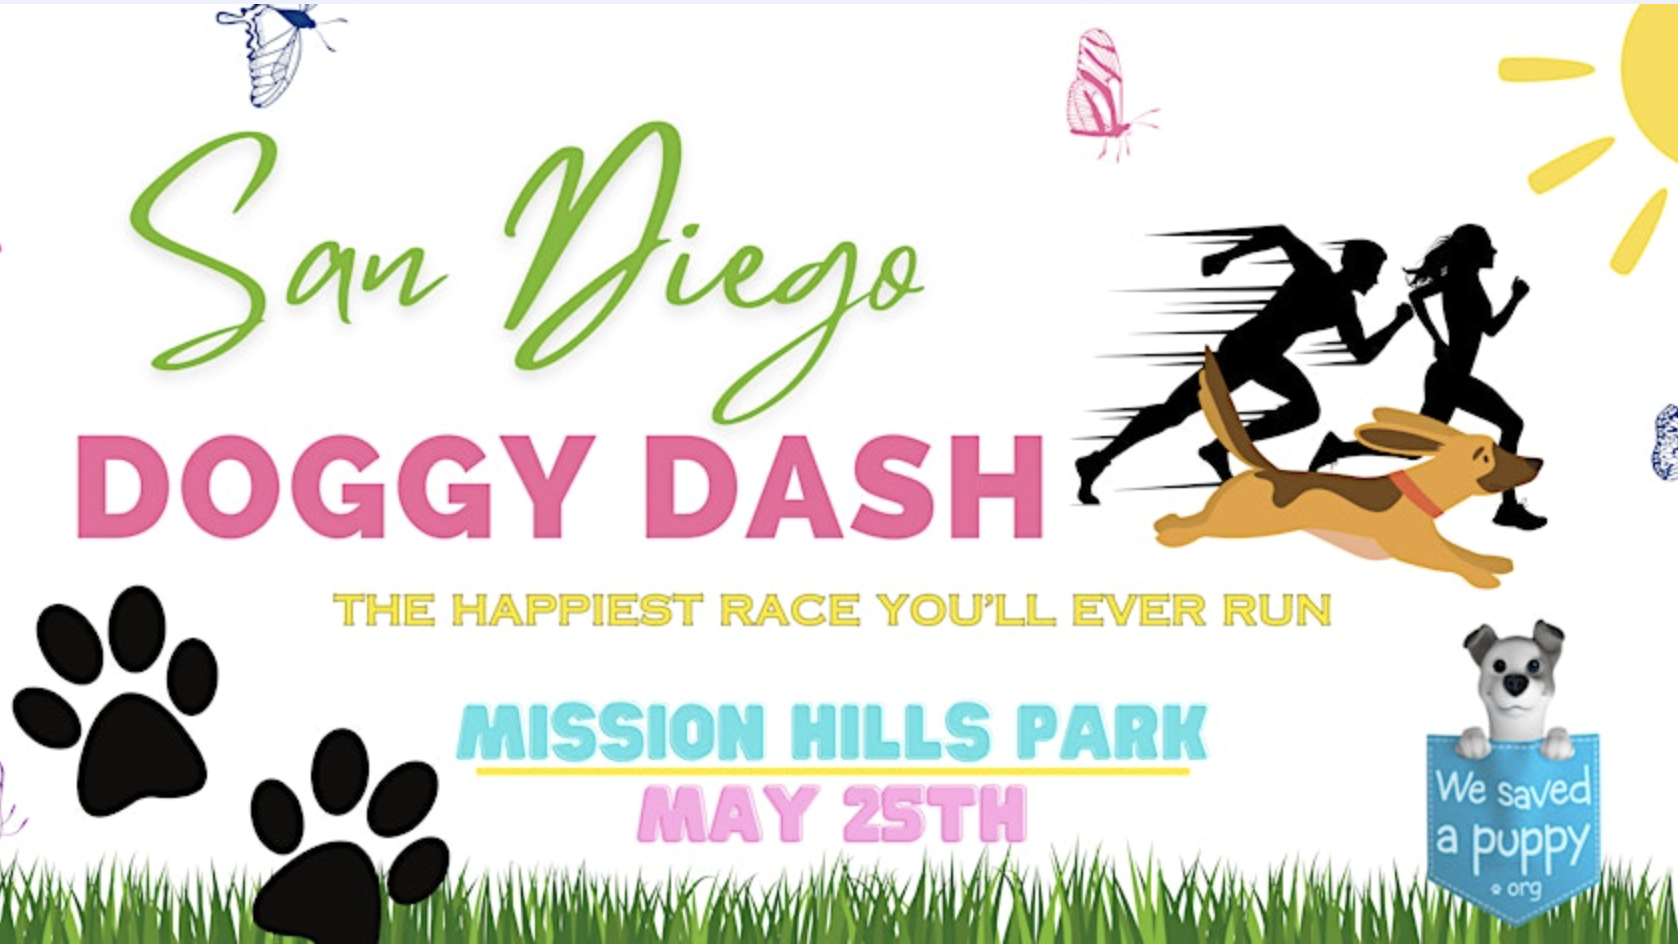 Banner for the San Diego Doggy Dash:
- Silhouettes: Running person and dog
- Text: "The happiest race you'll ever run"
- Event Details: Mission Hills Park, May 25th
- Additional Graphics: Paw prints, grass, butterflies, "We saved a puppy" graphic